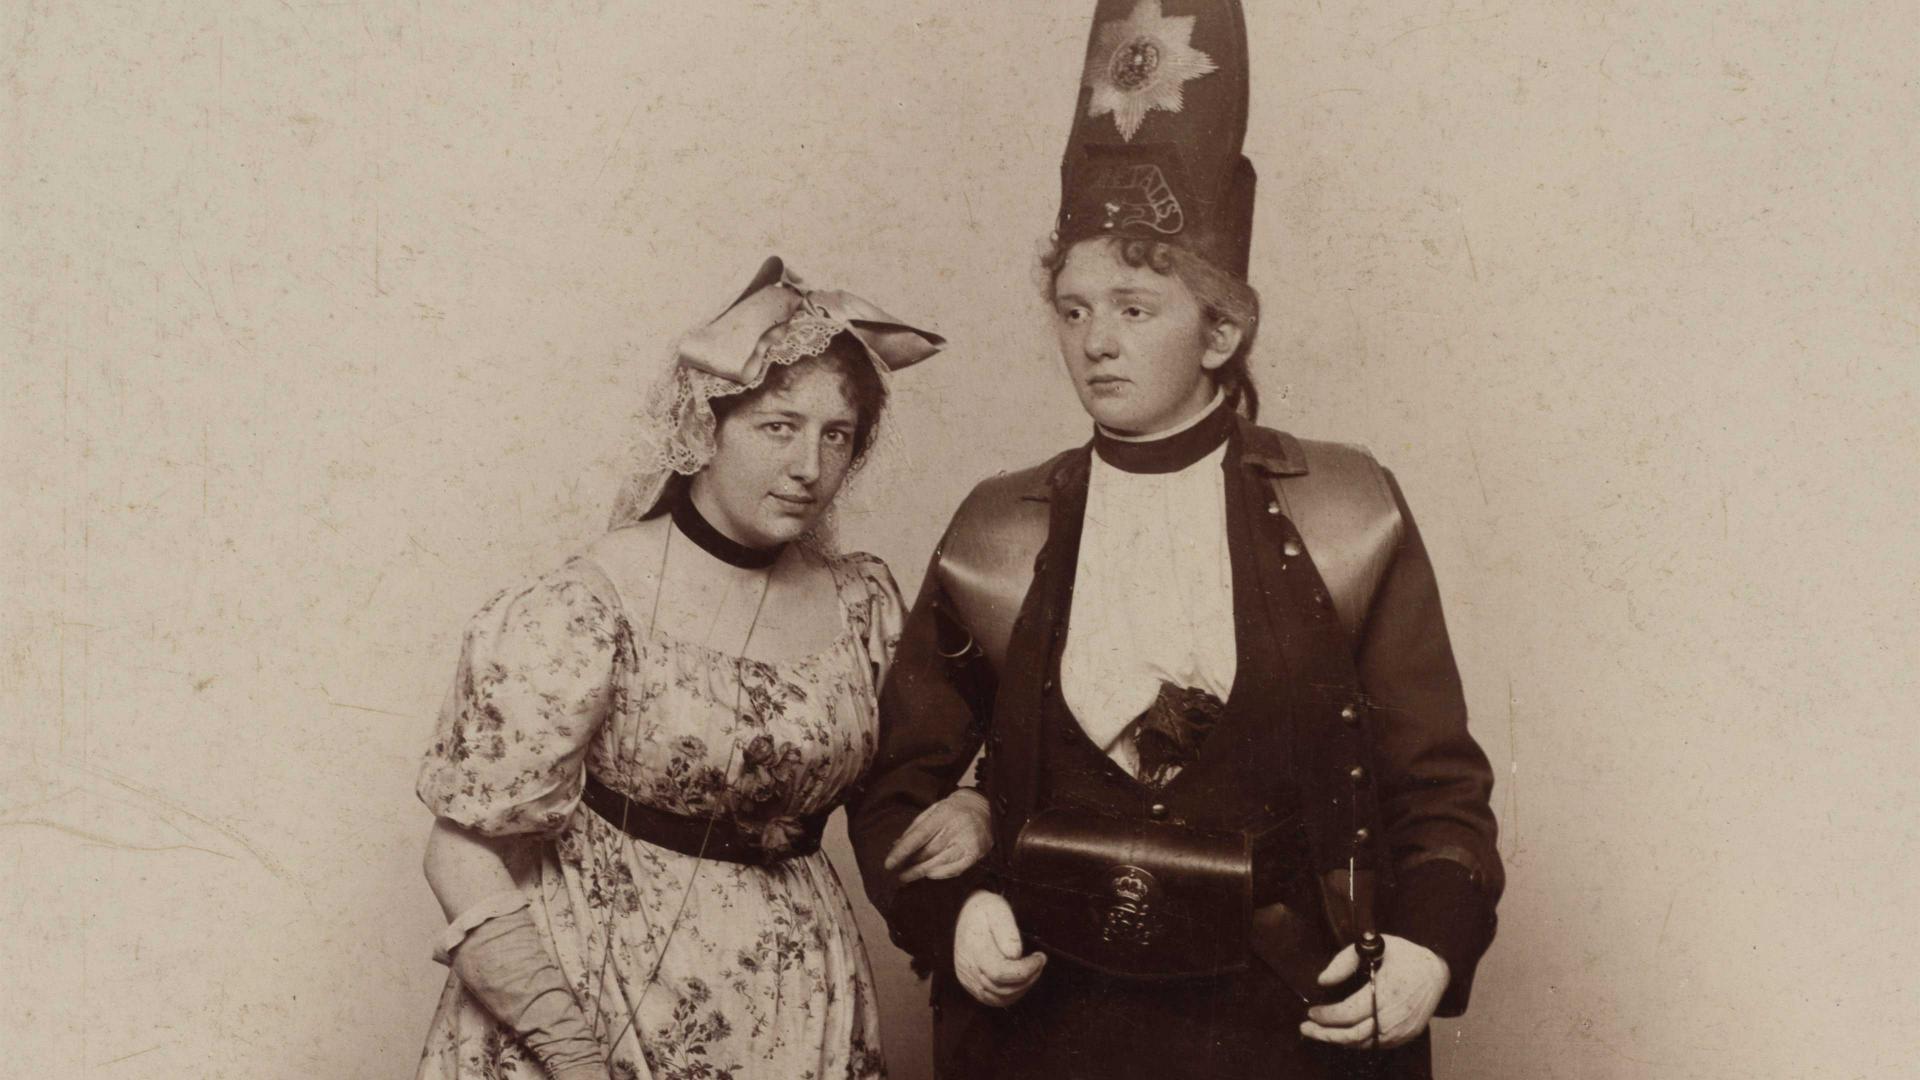 Historical black and white photograph of two women in costumes.